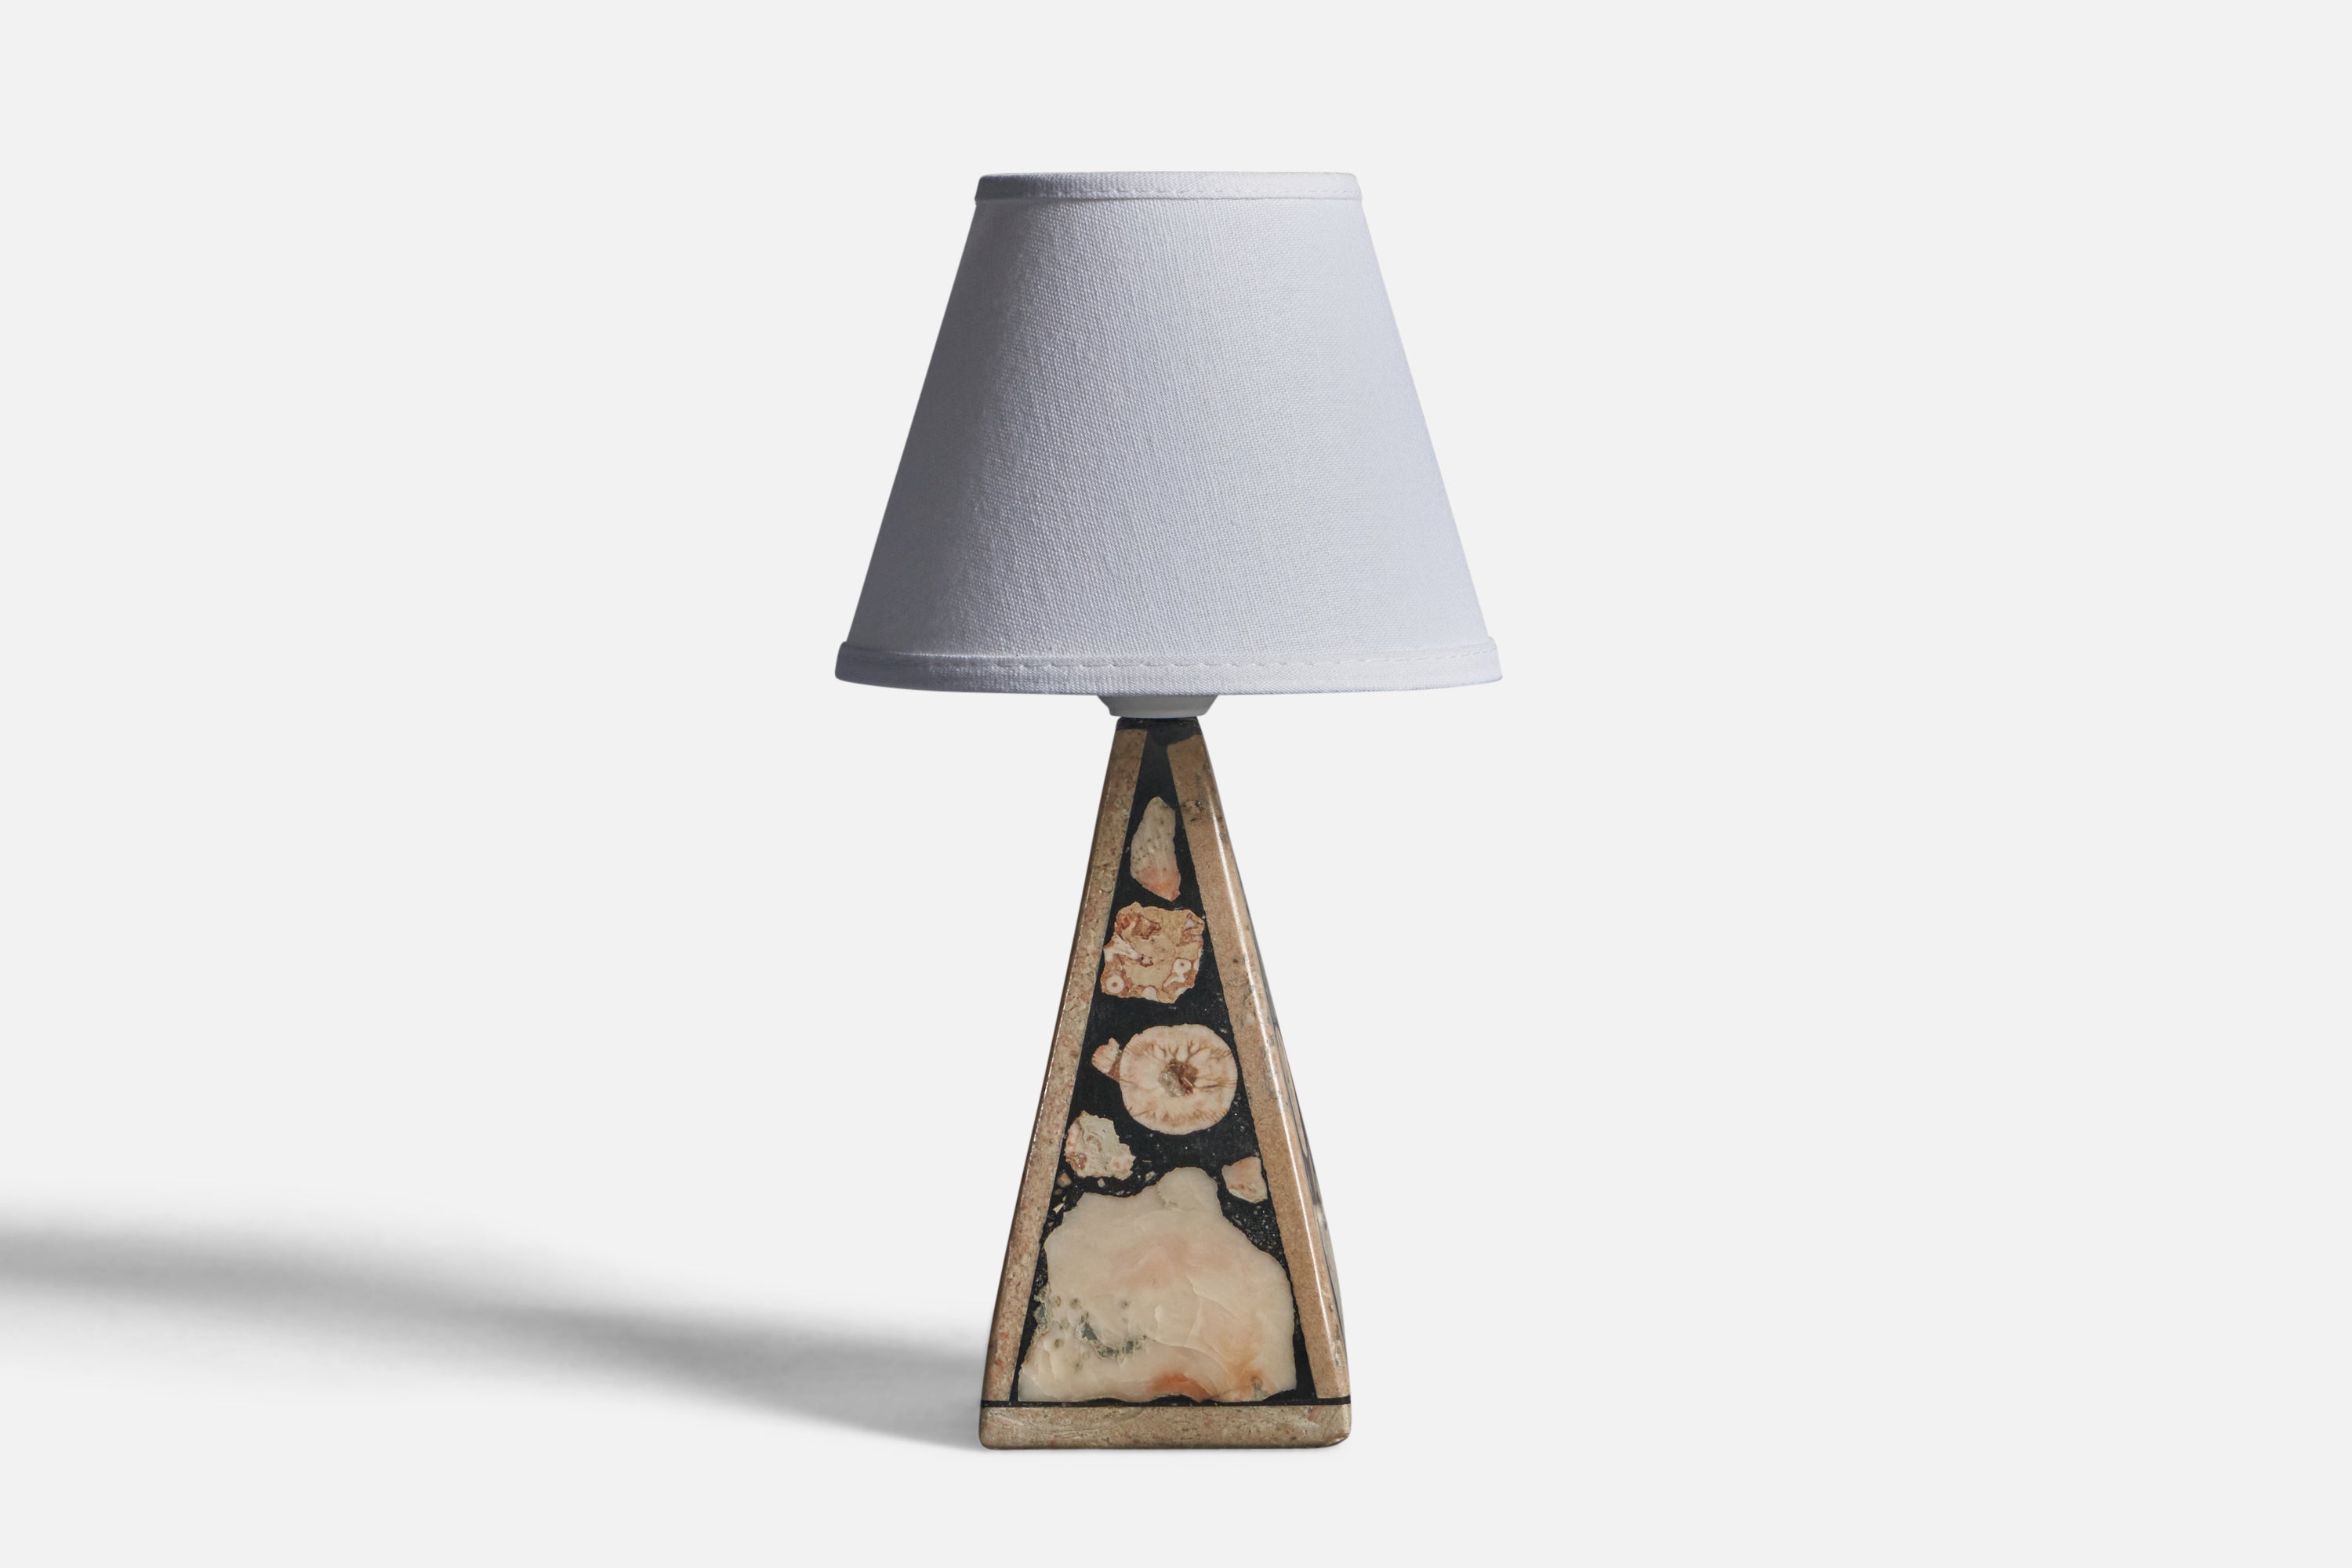 A fossil stone table lamp designed and produced in Gotland, Sweden, 1970s.

Dimensions of Lamp (inches): 8.5